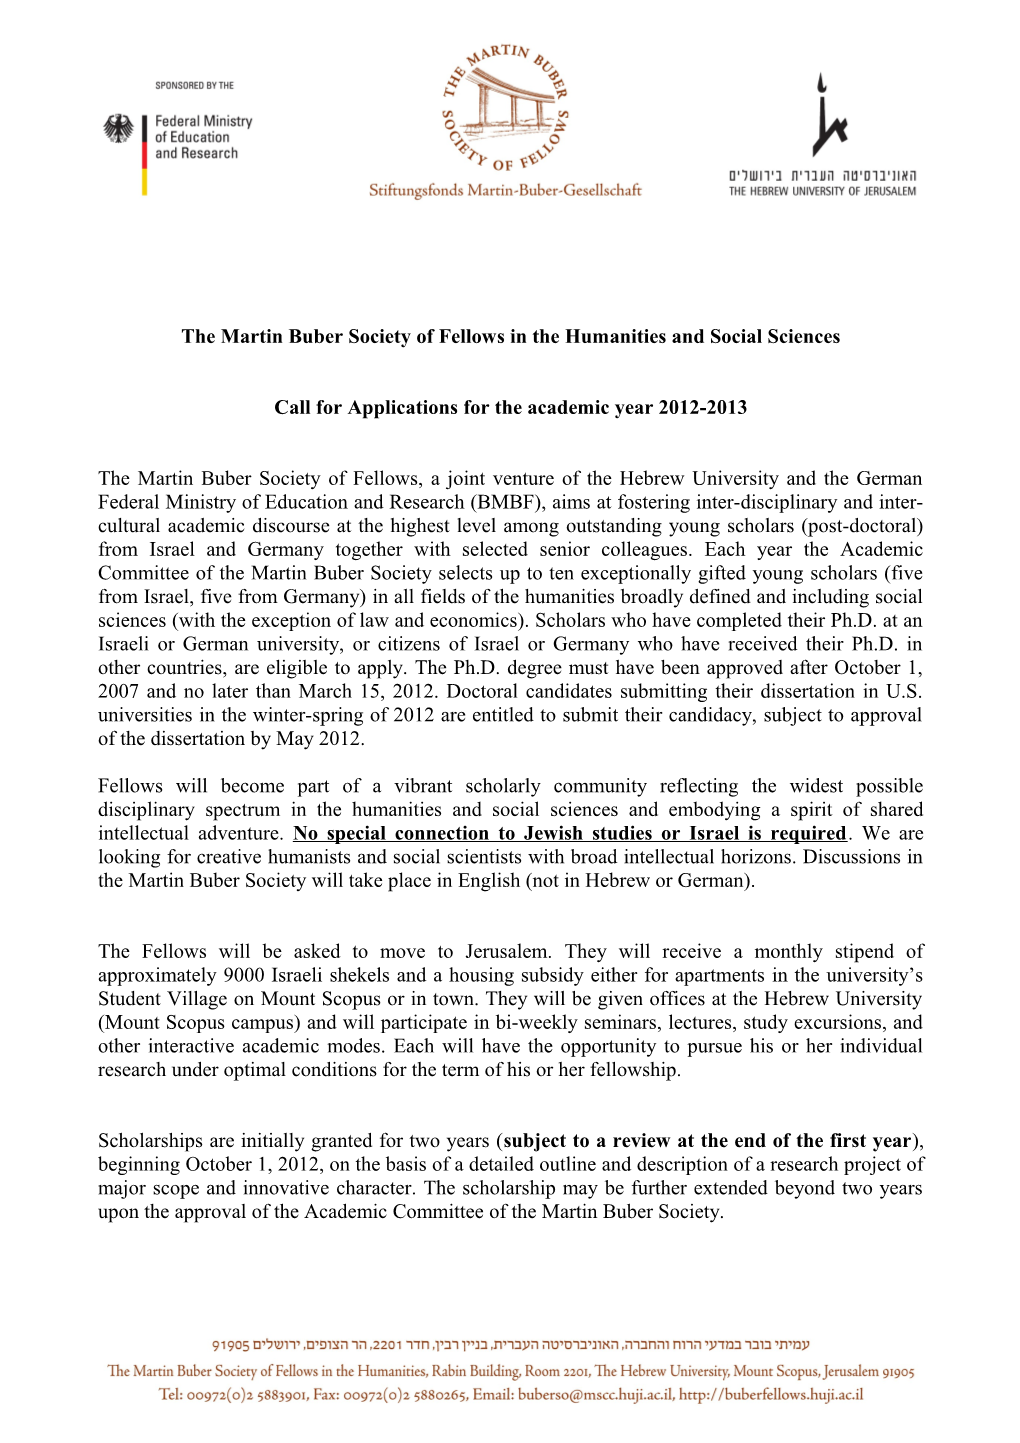 Call for Applications for the Academic Year 2012-2013